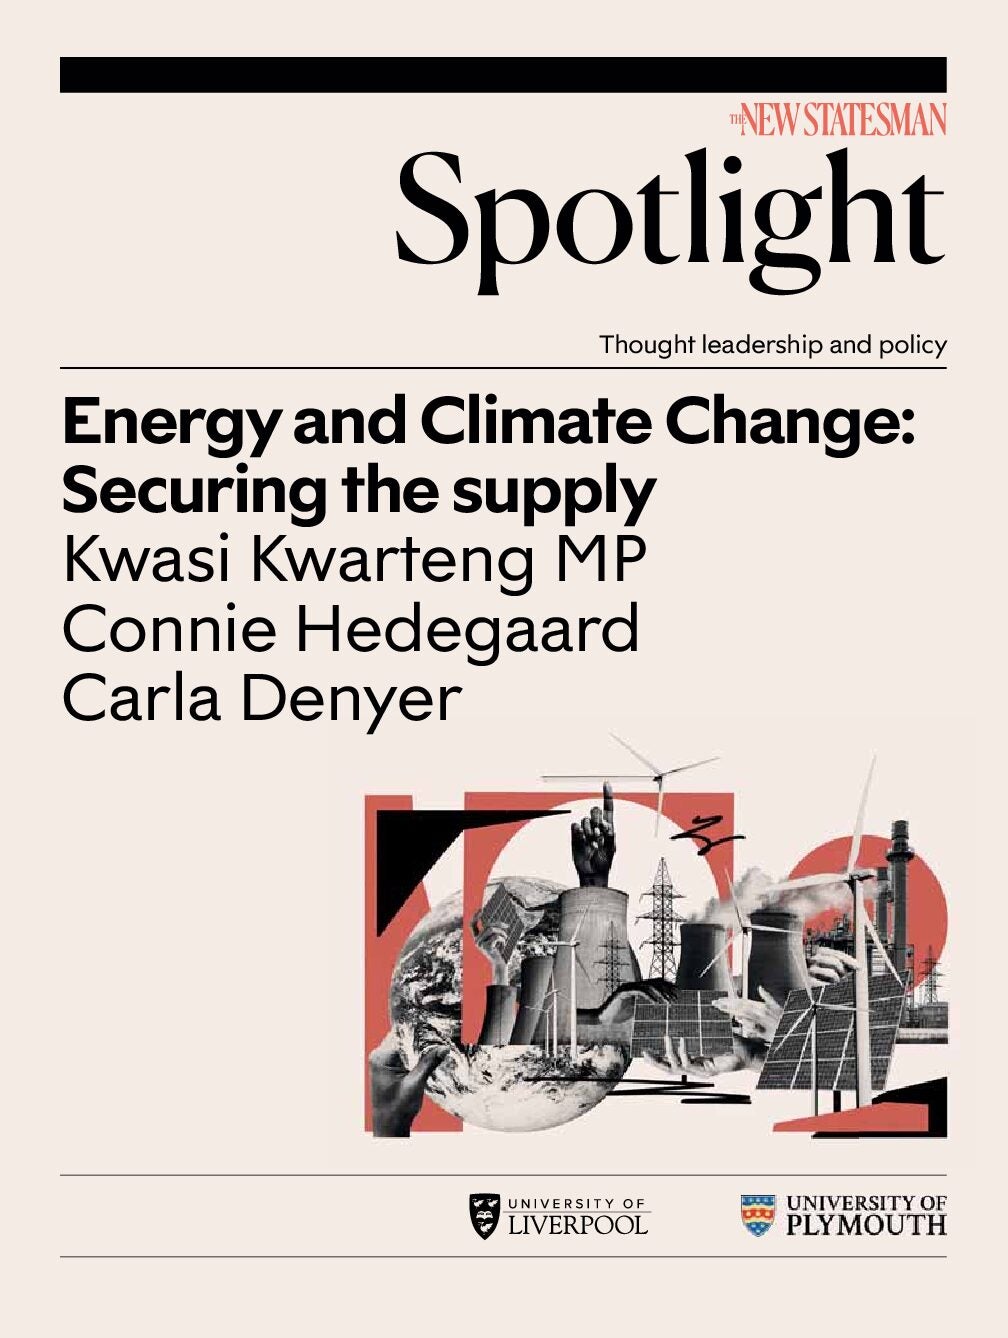 Energy and Climate Change: Securing the supply